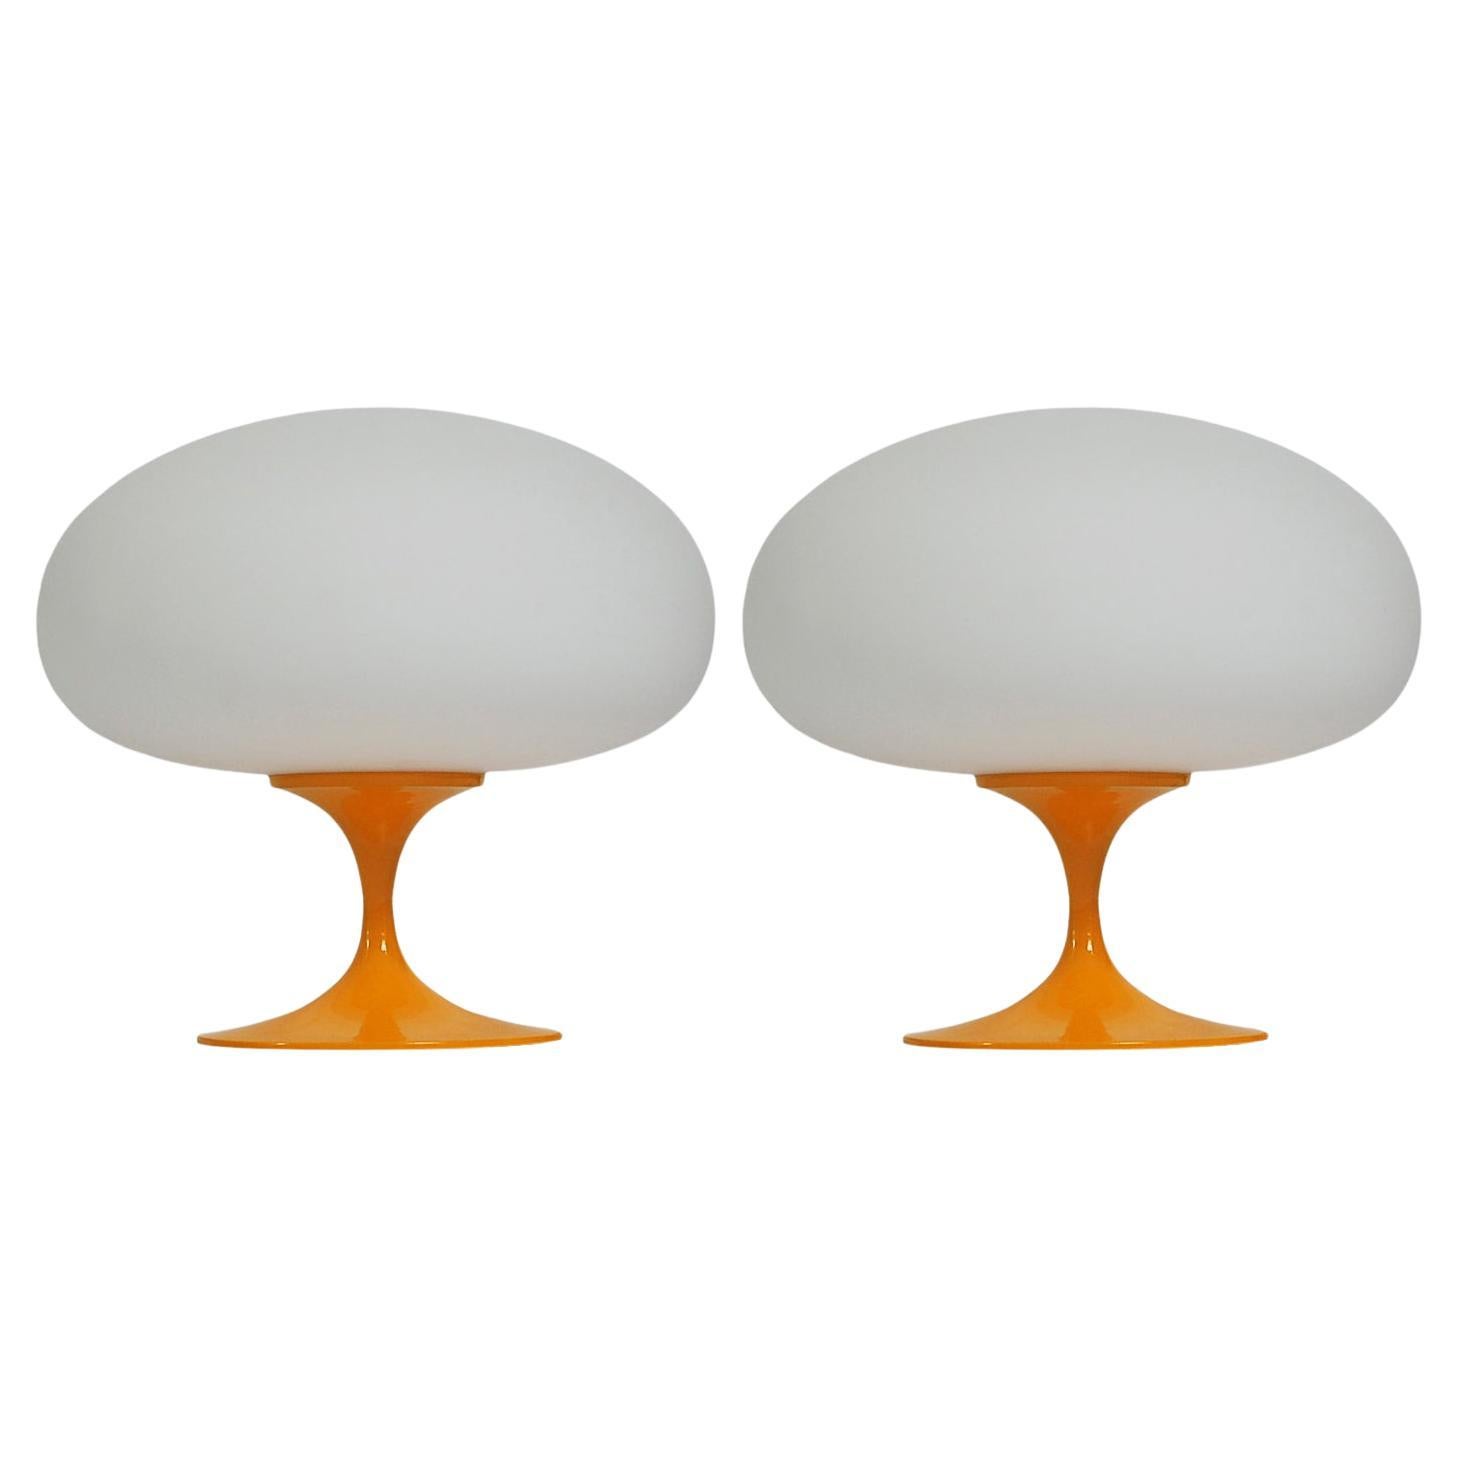 Pair of Mid-Century Tulip Table Lamps by Designline in Orange on White Glass